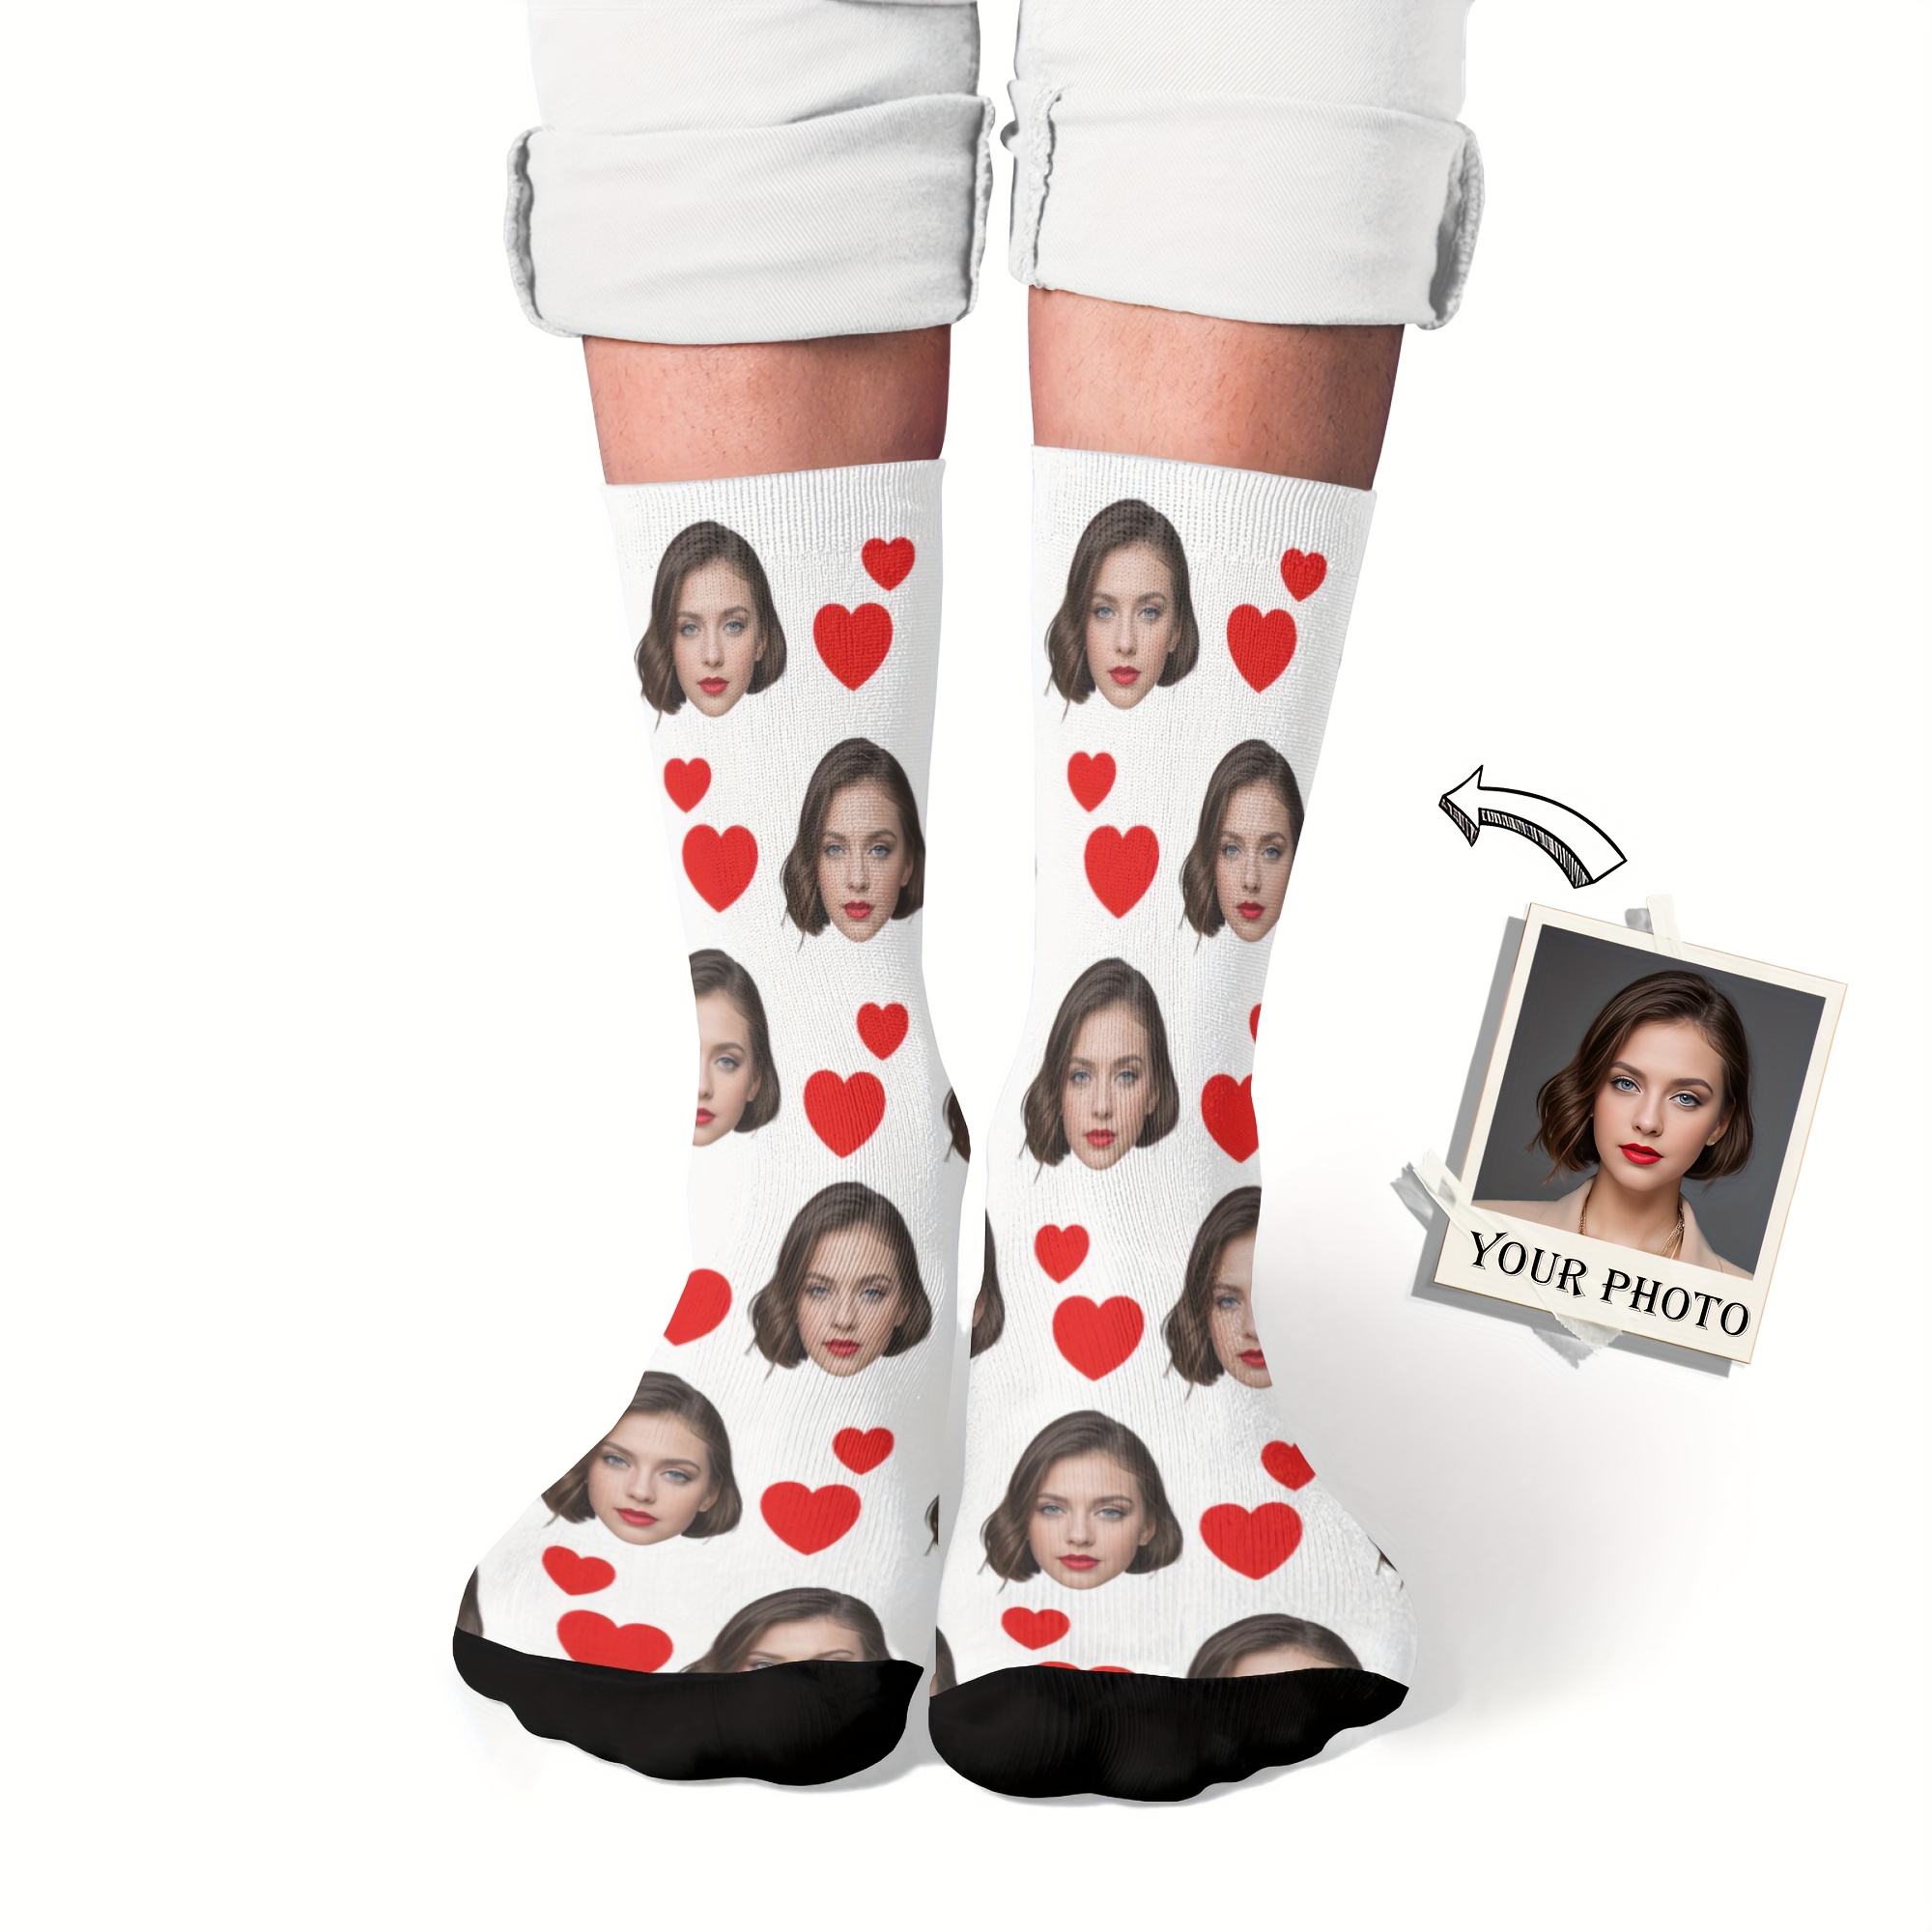 

1 Pair Of Men's Knitted Funny Face Pattern Crew Socks Support Personal Photo Customization, Comfy & Breathable Elastic Socks, For Gifts, Parties And Daily Wearing